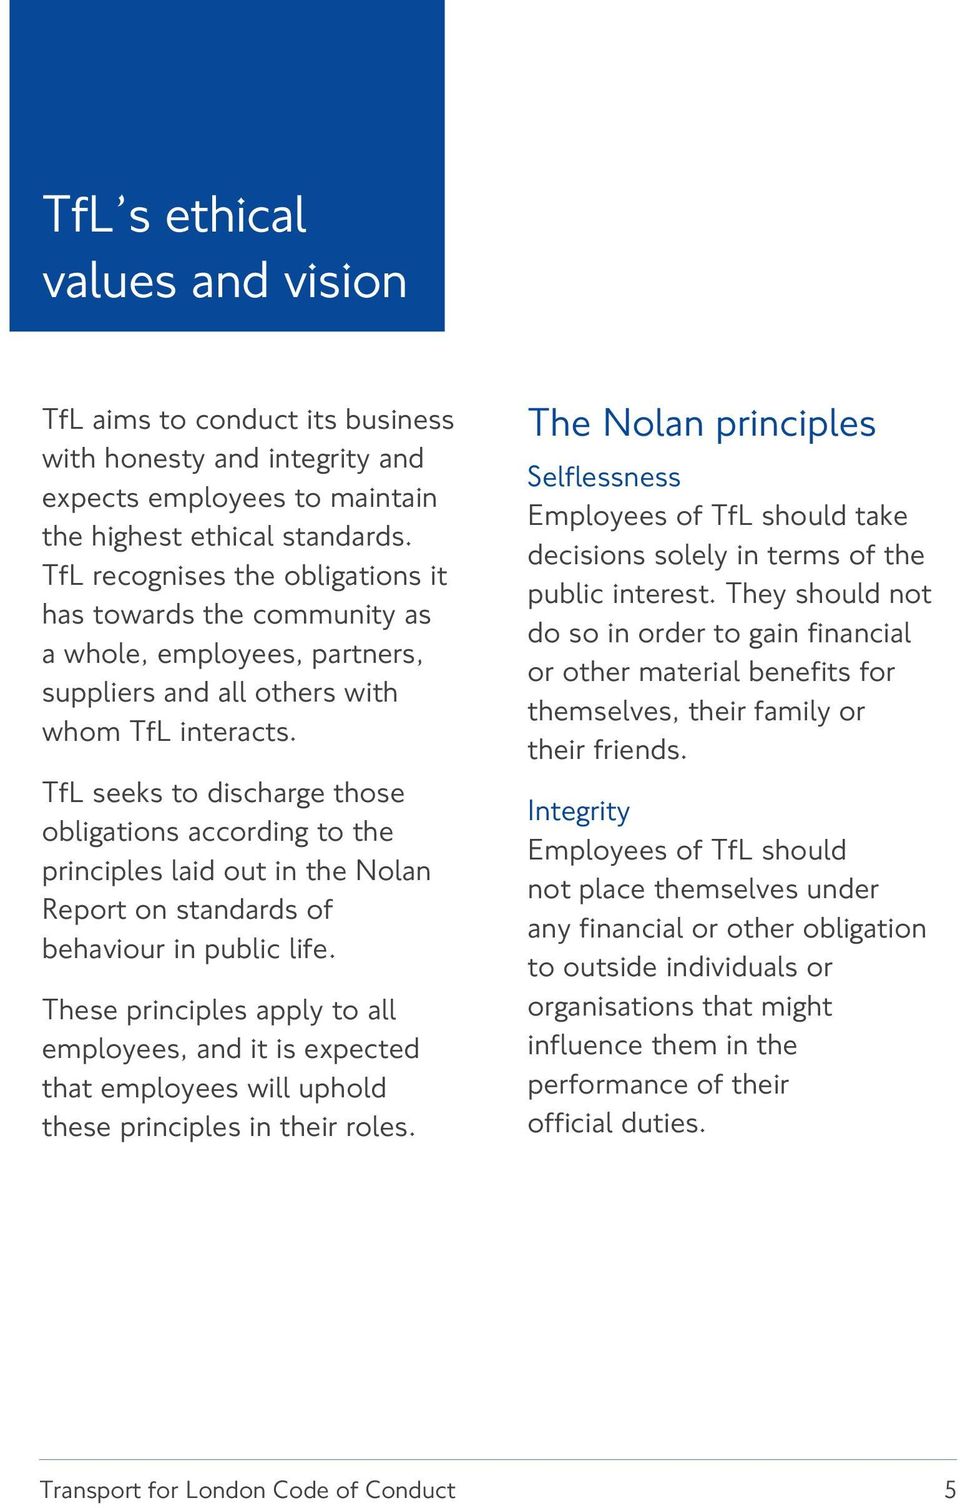 TfL seeks to discharge those obligations according to the principles laid out in the Nolan Report on standards of behaviour in public life.